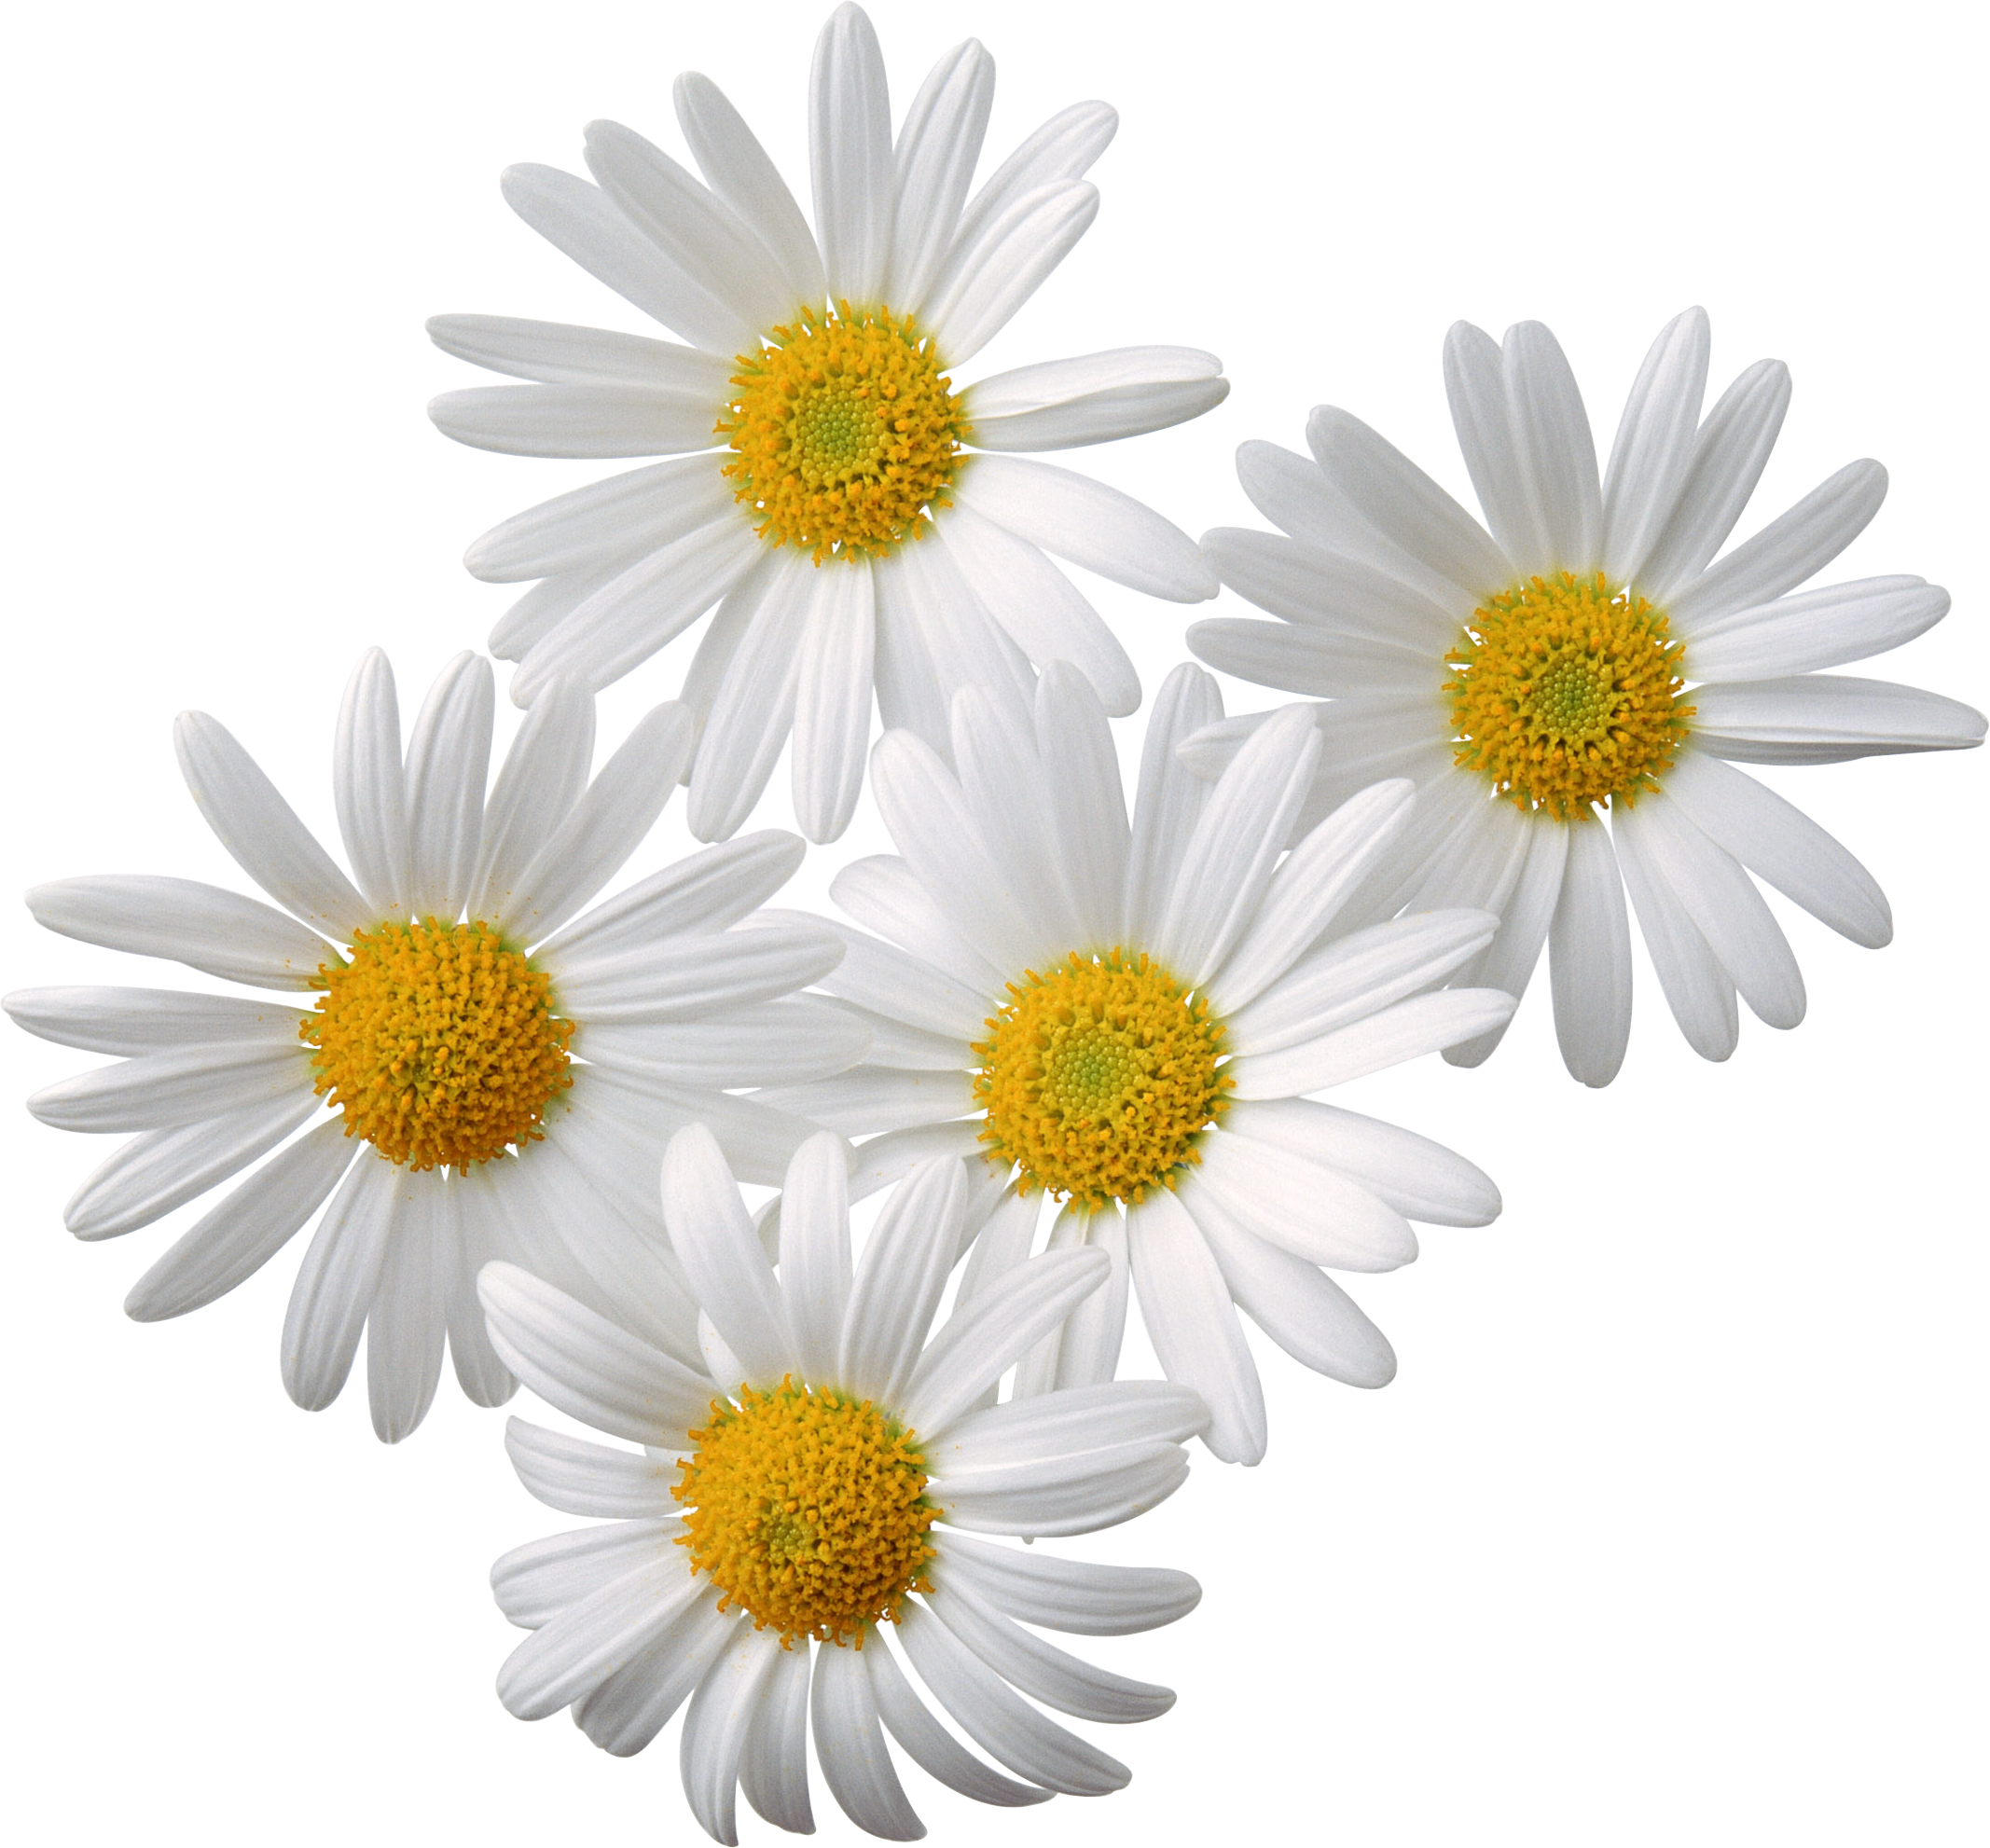 Chamomile.png PlusPng.com 